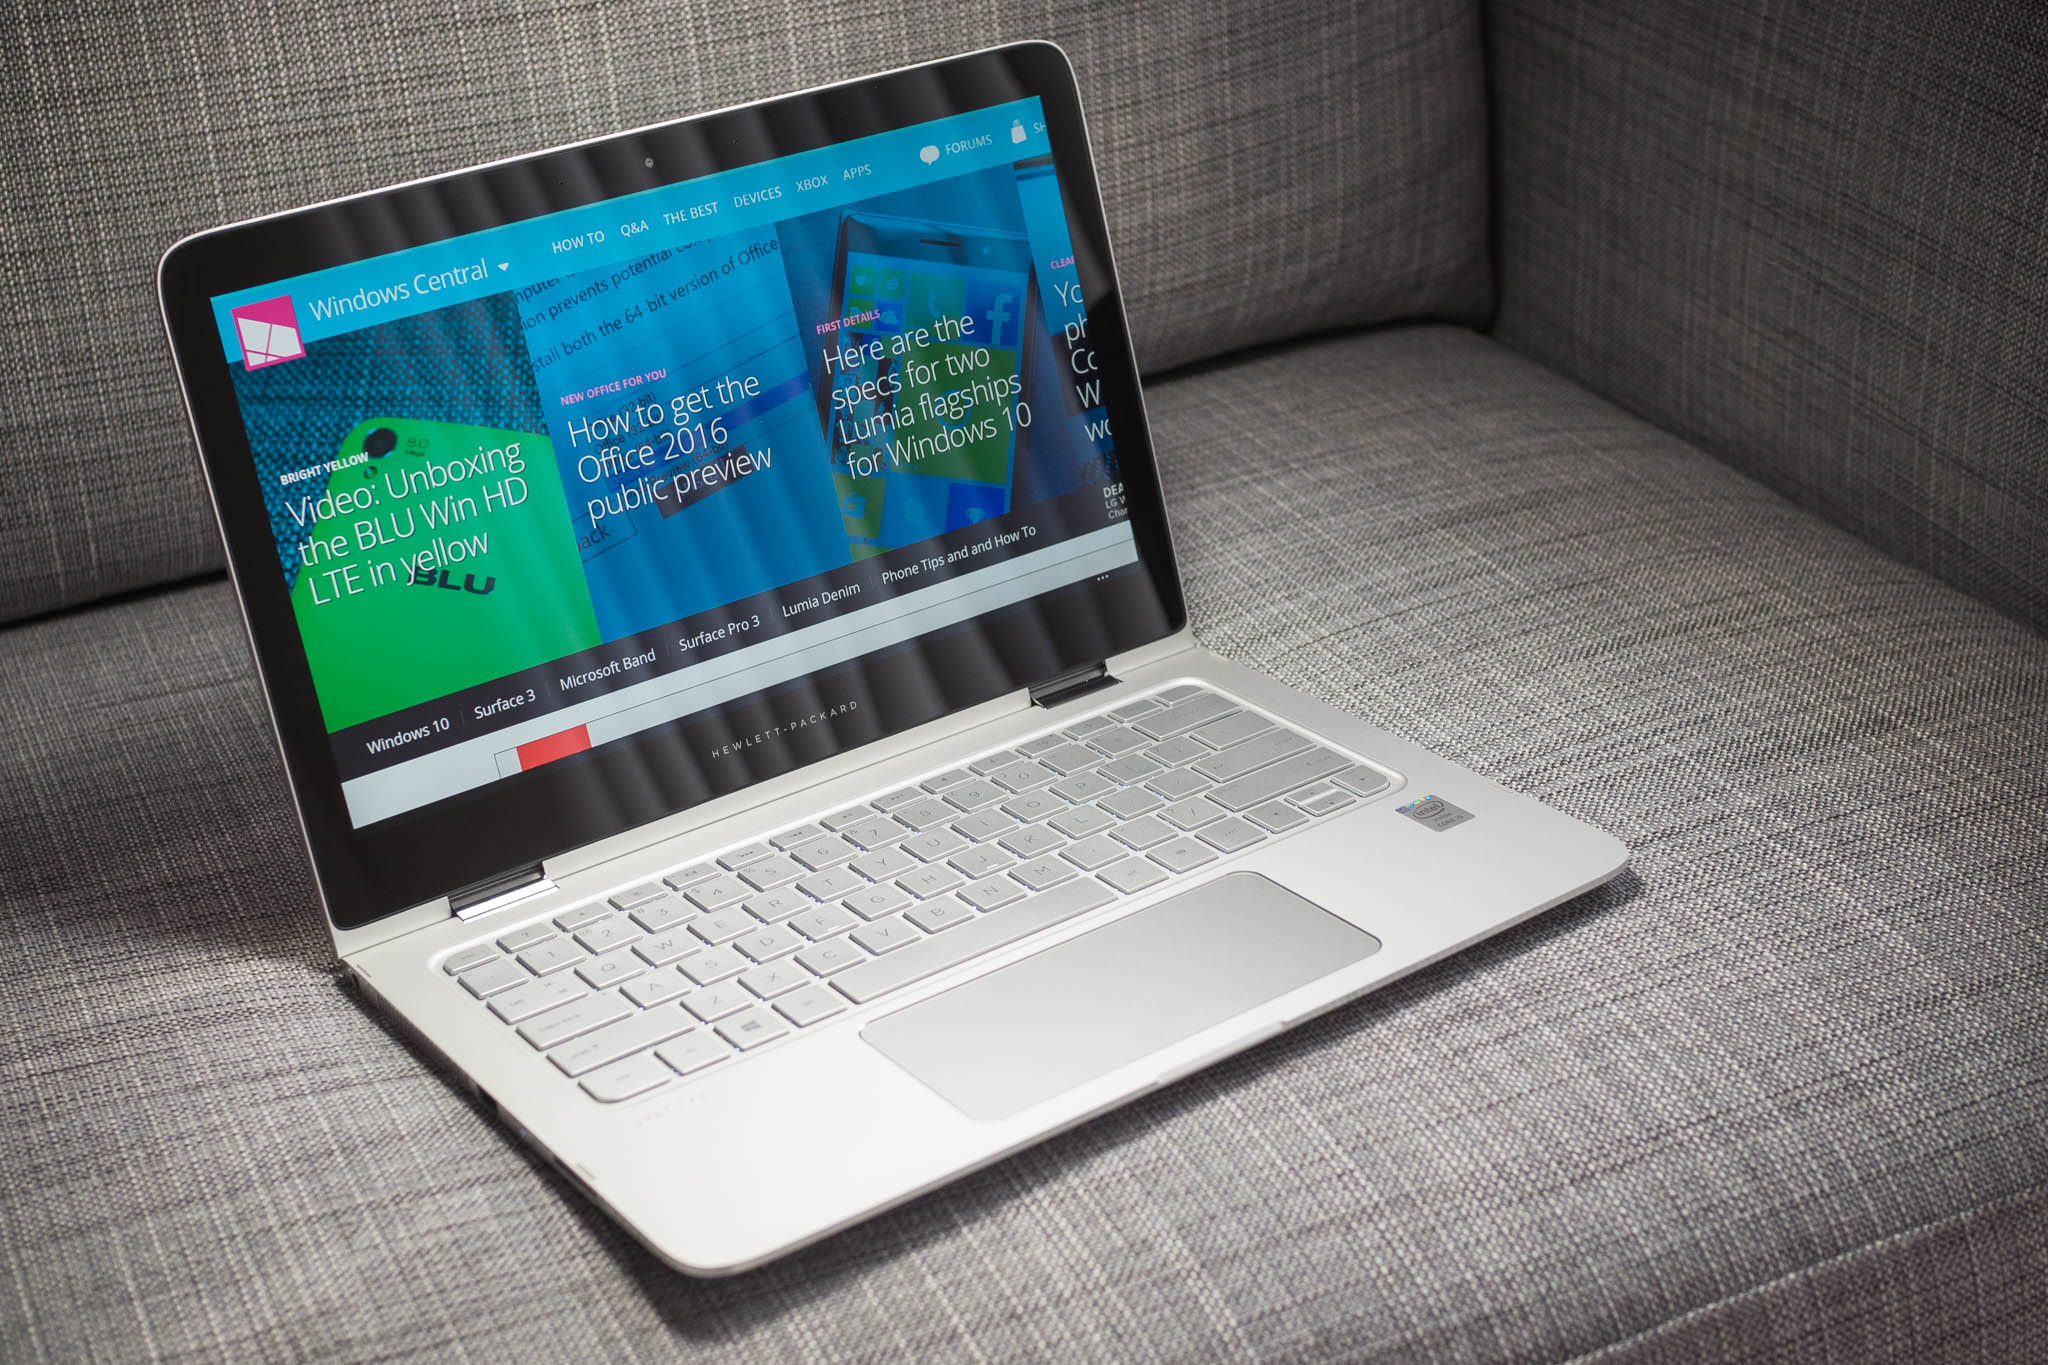 HP Spectre x360 from 2015